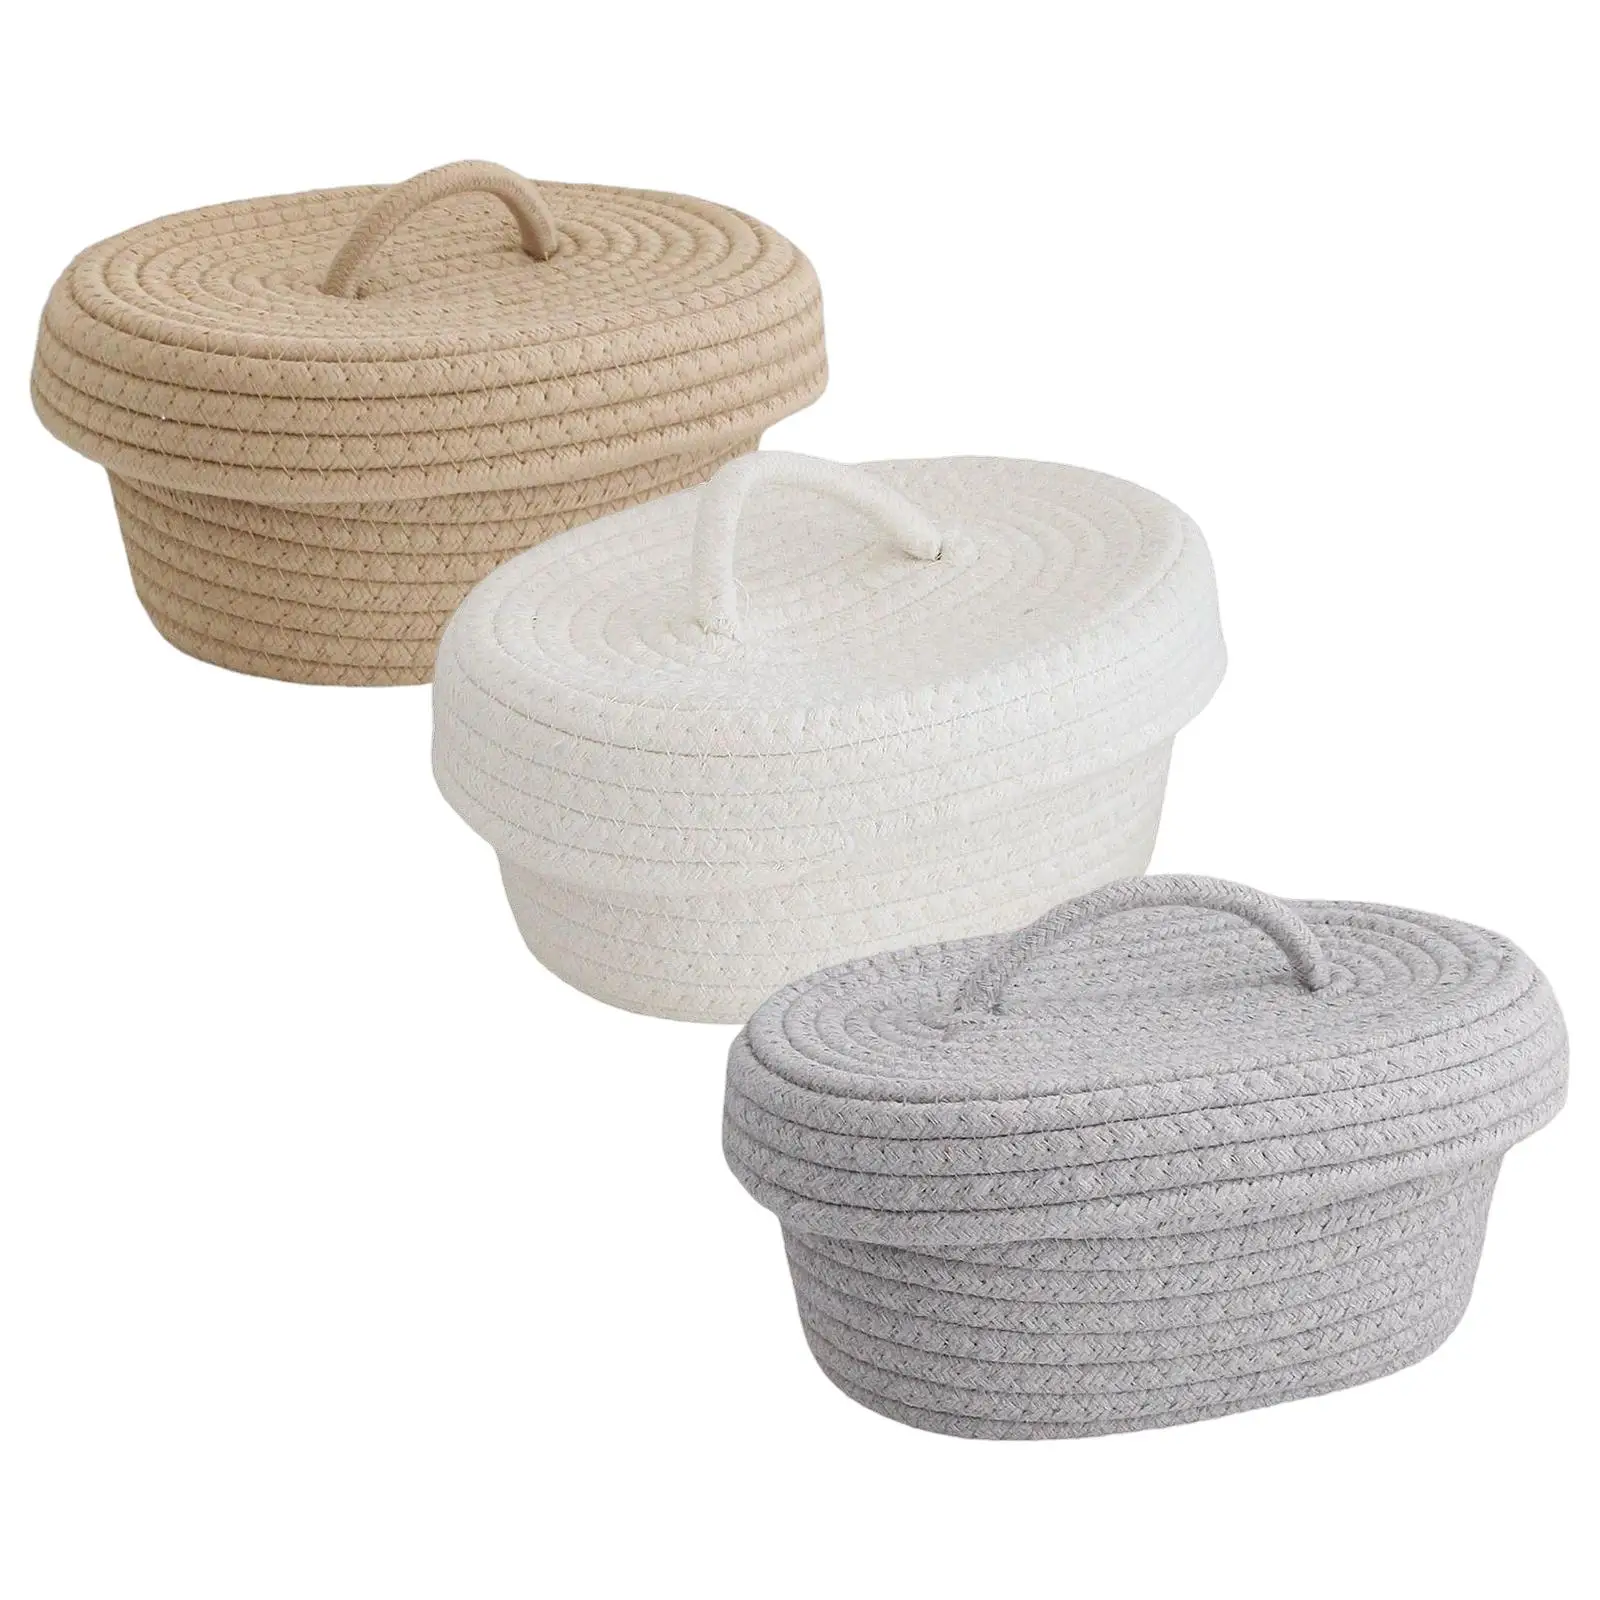 Multifunction Woven Rope Basket with Lid for Sundries Blanket Nursery Kids Toy Cosmetics